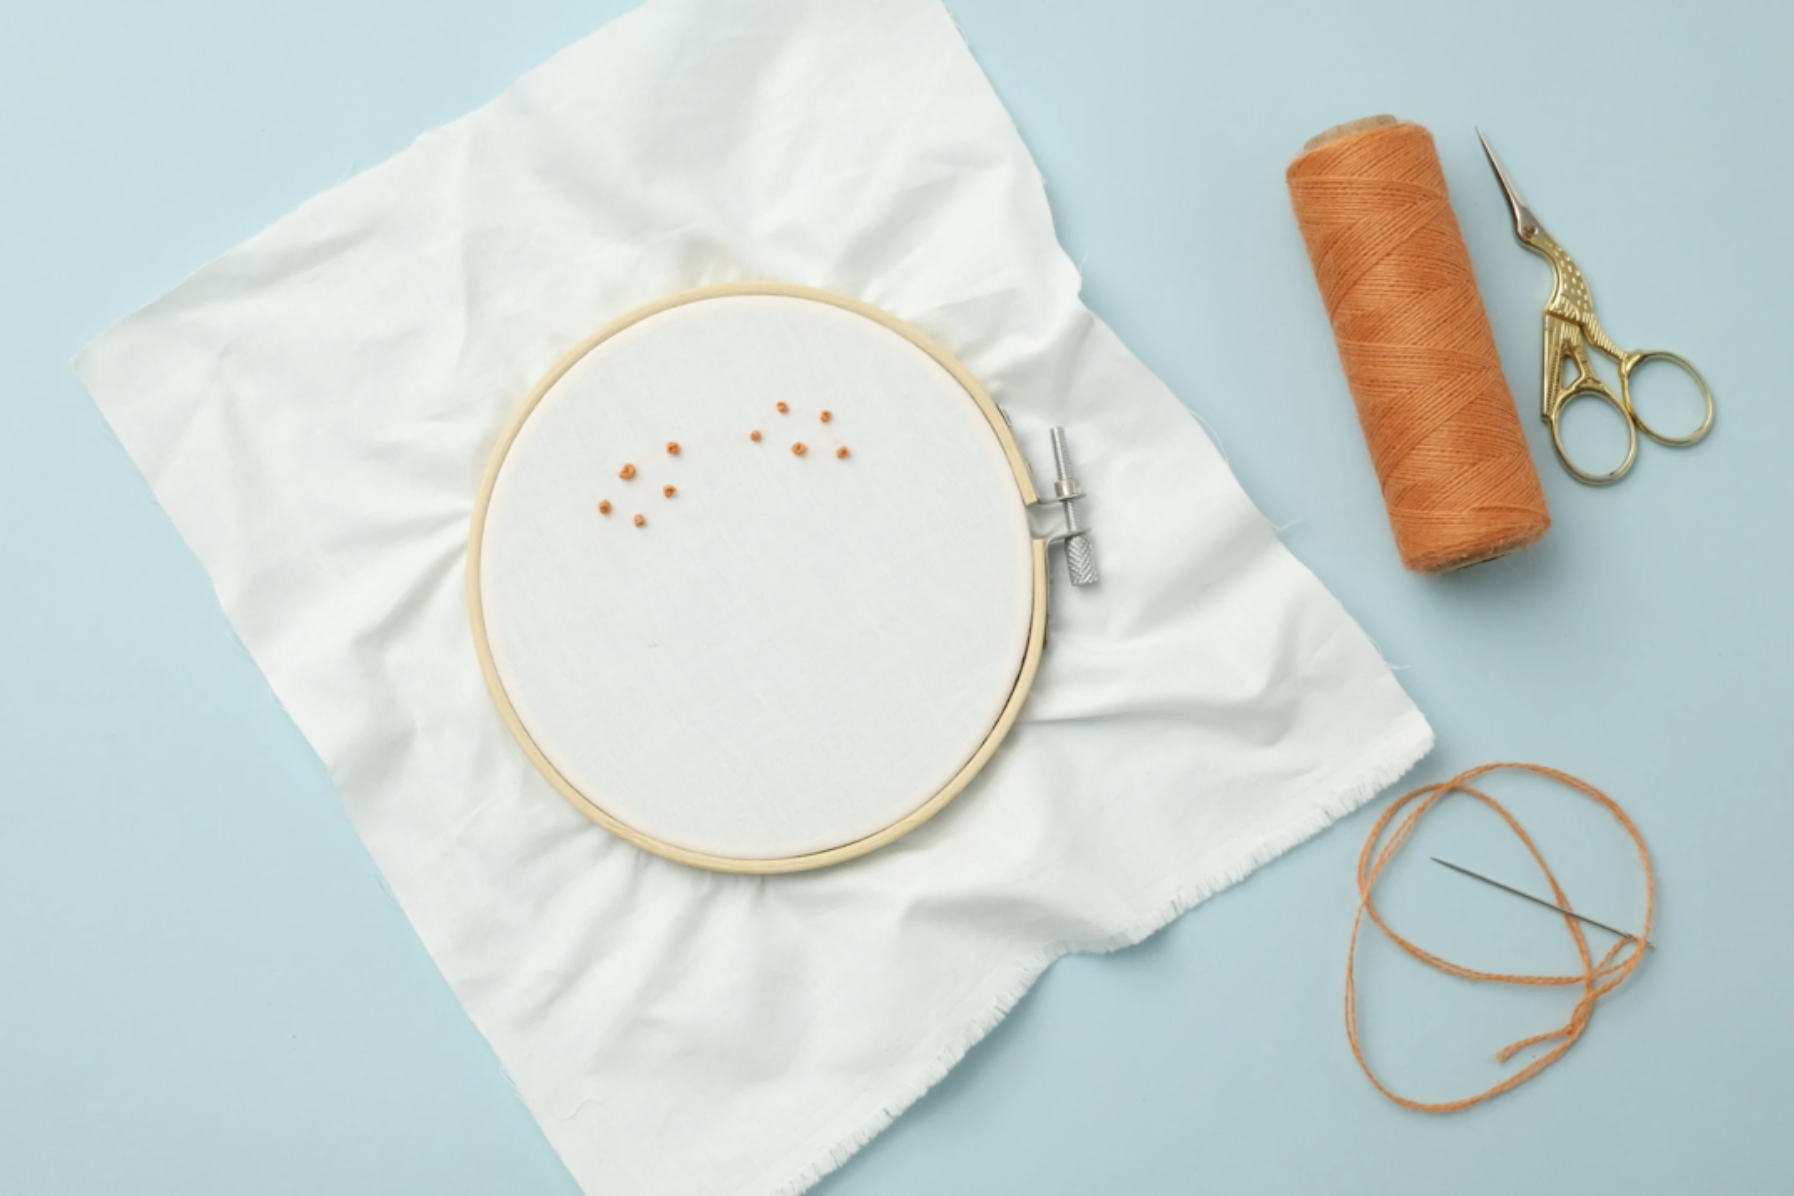 6: French Knot